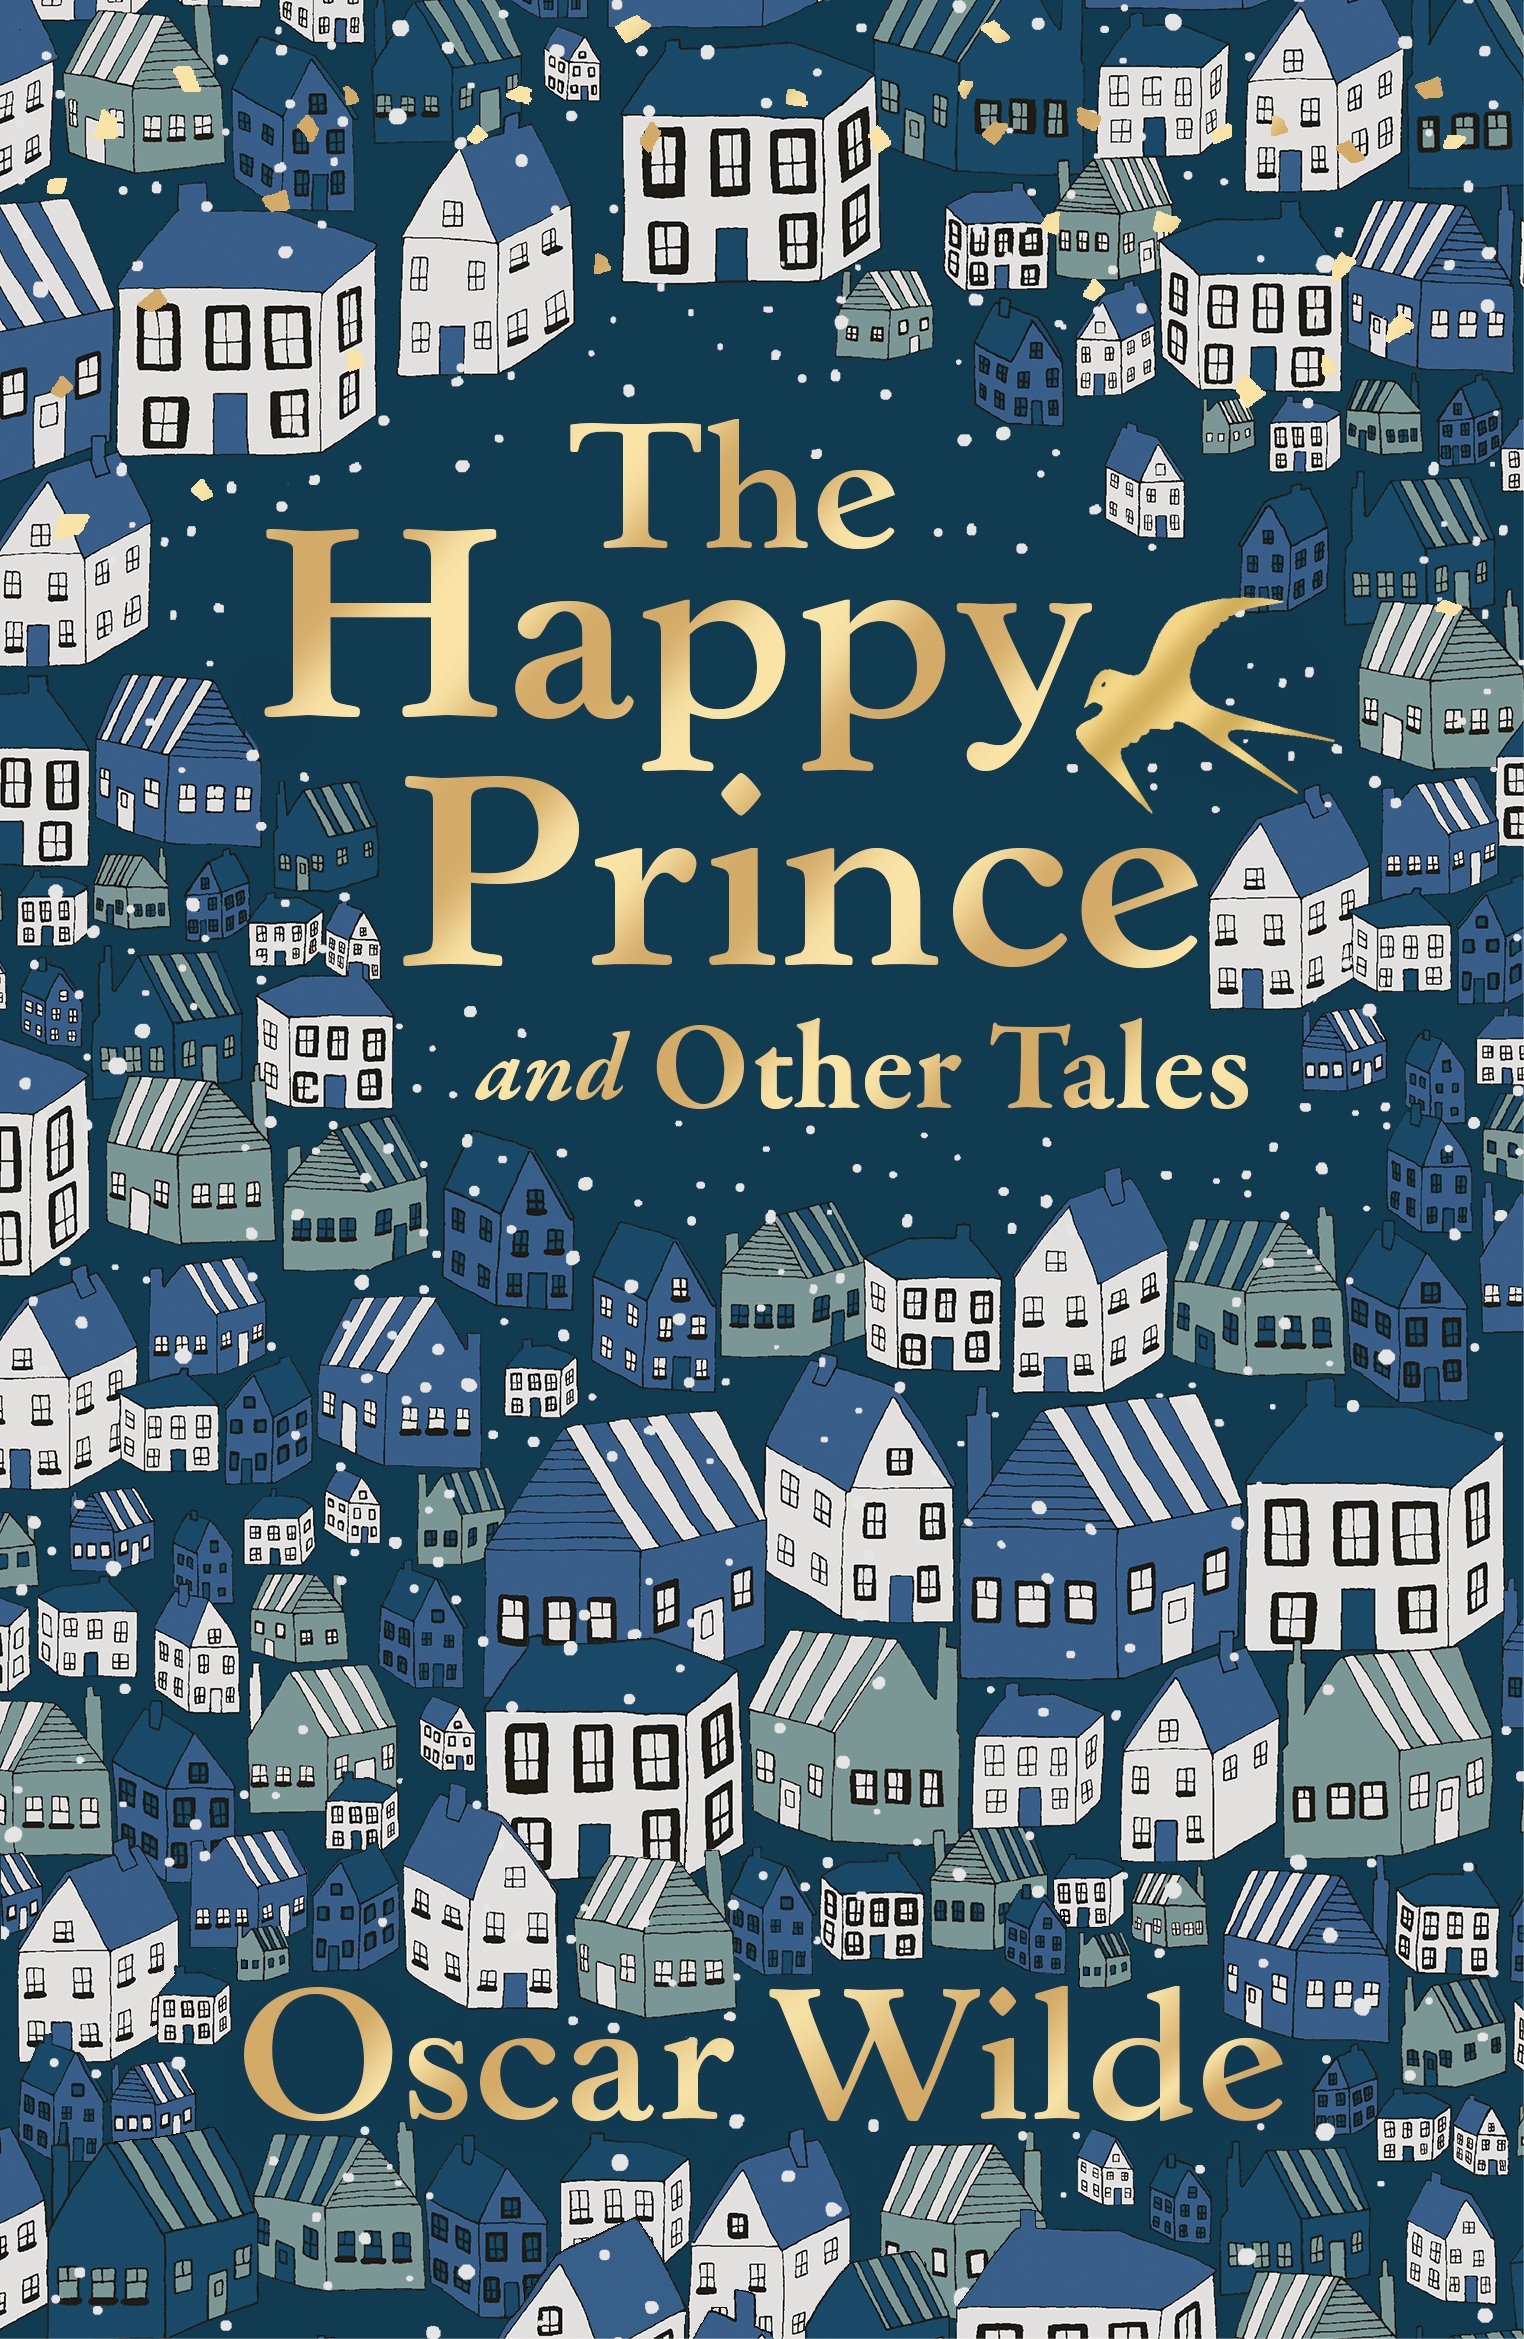 The Happy Prince and Other Tales (Liberty Classics) by Oscar Wilde | Faber